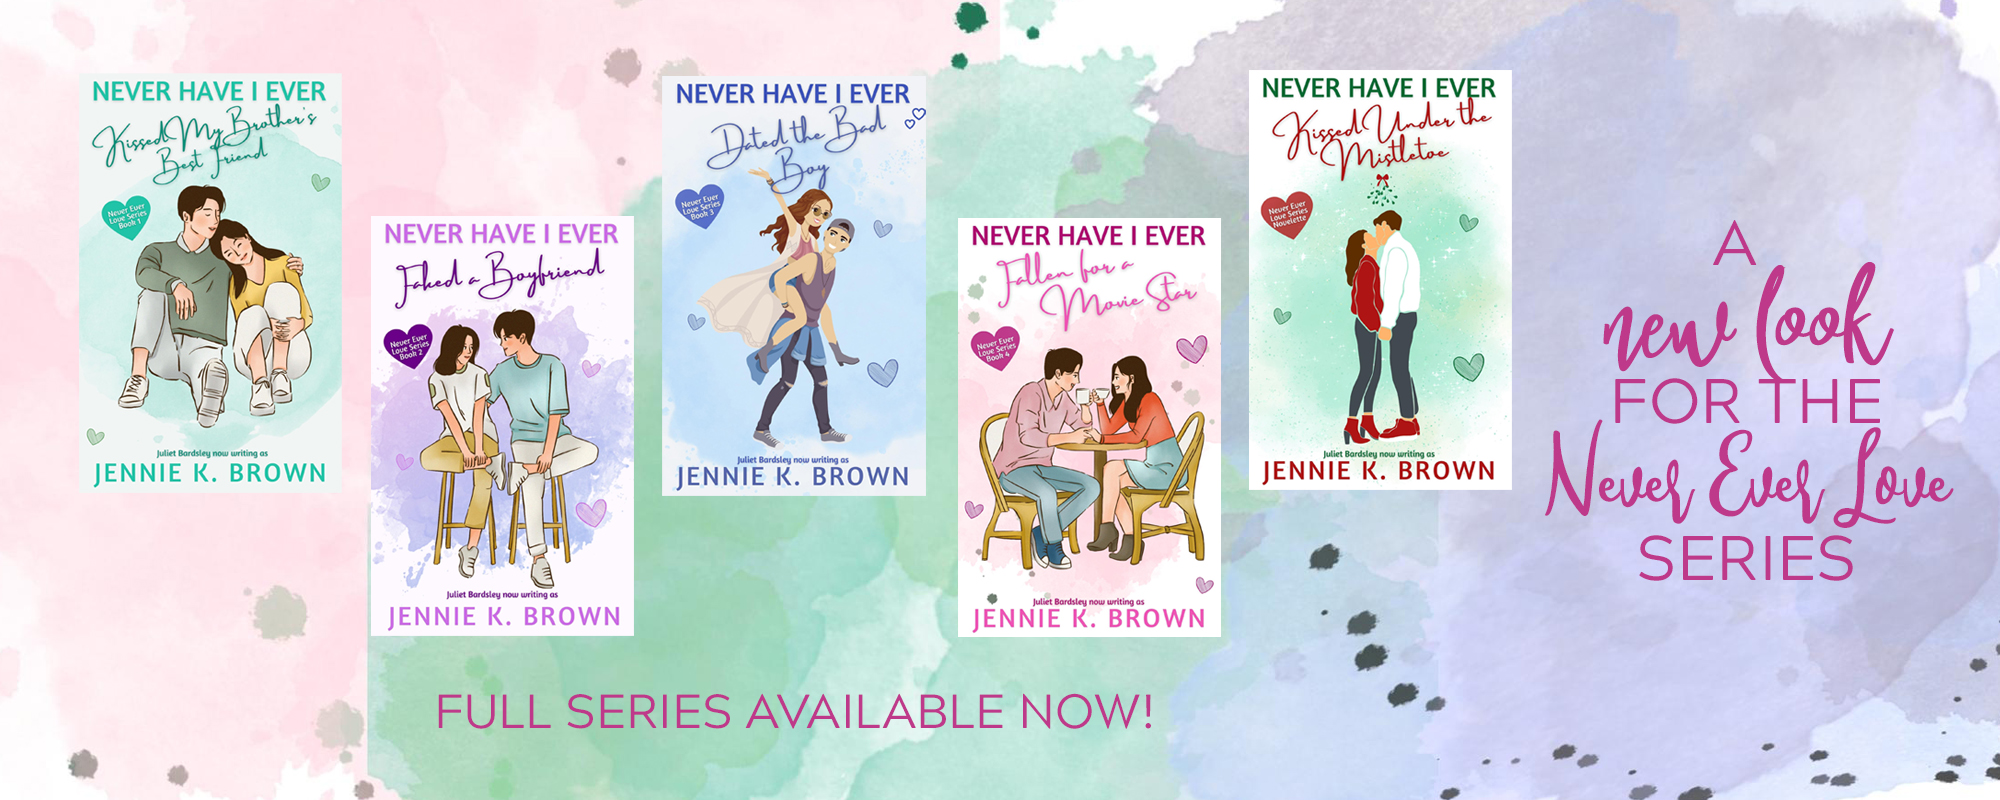 A new look for the Never Ever Love Series